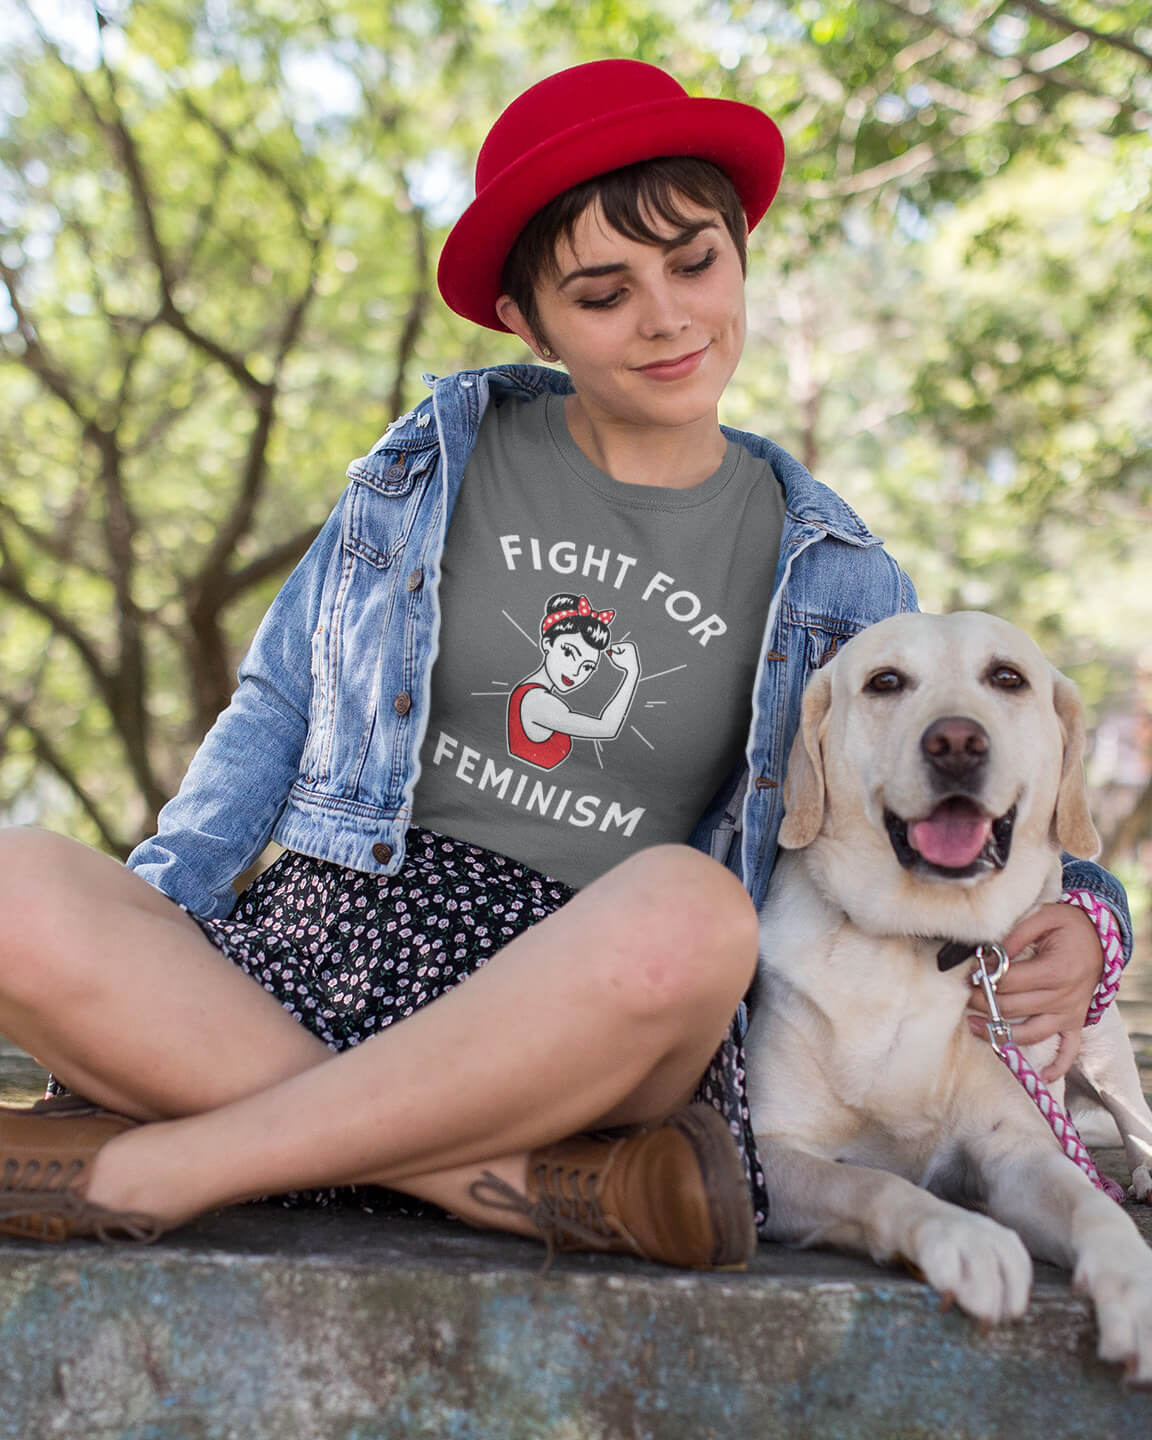 Woman petting her dog wearing Fight For Feminism shirt